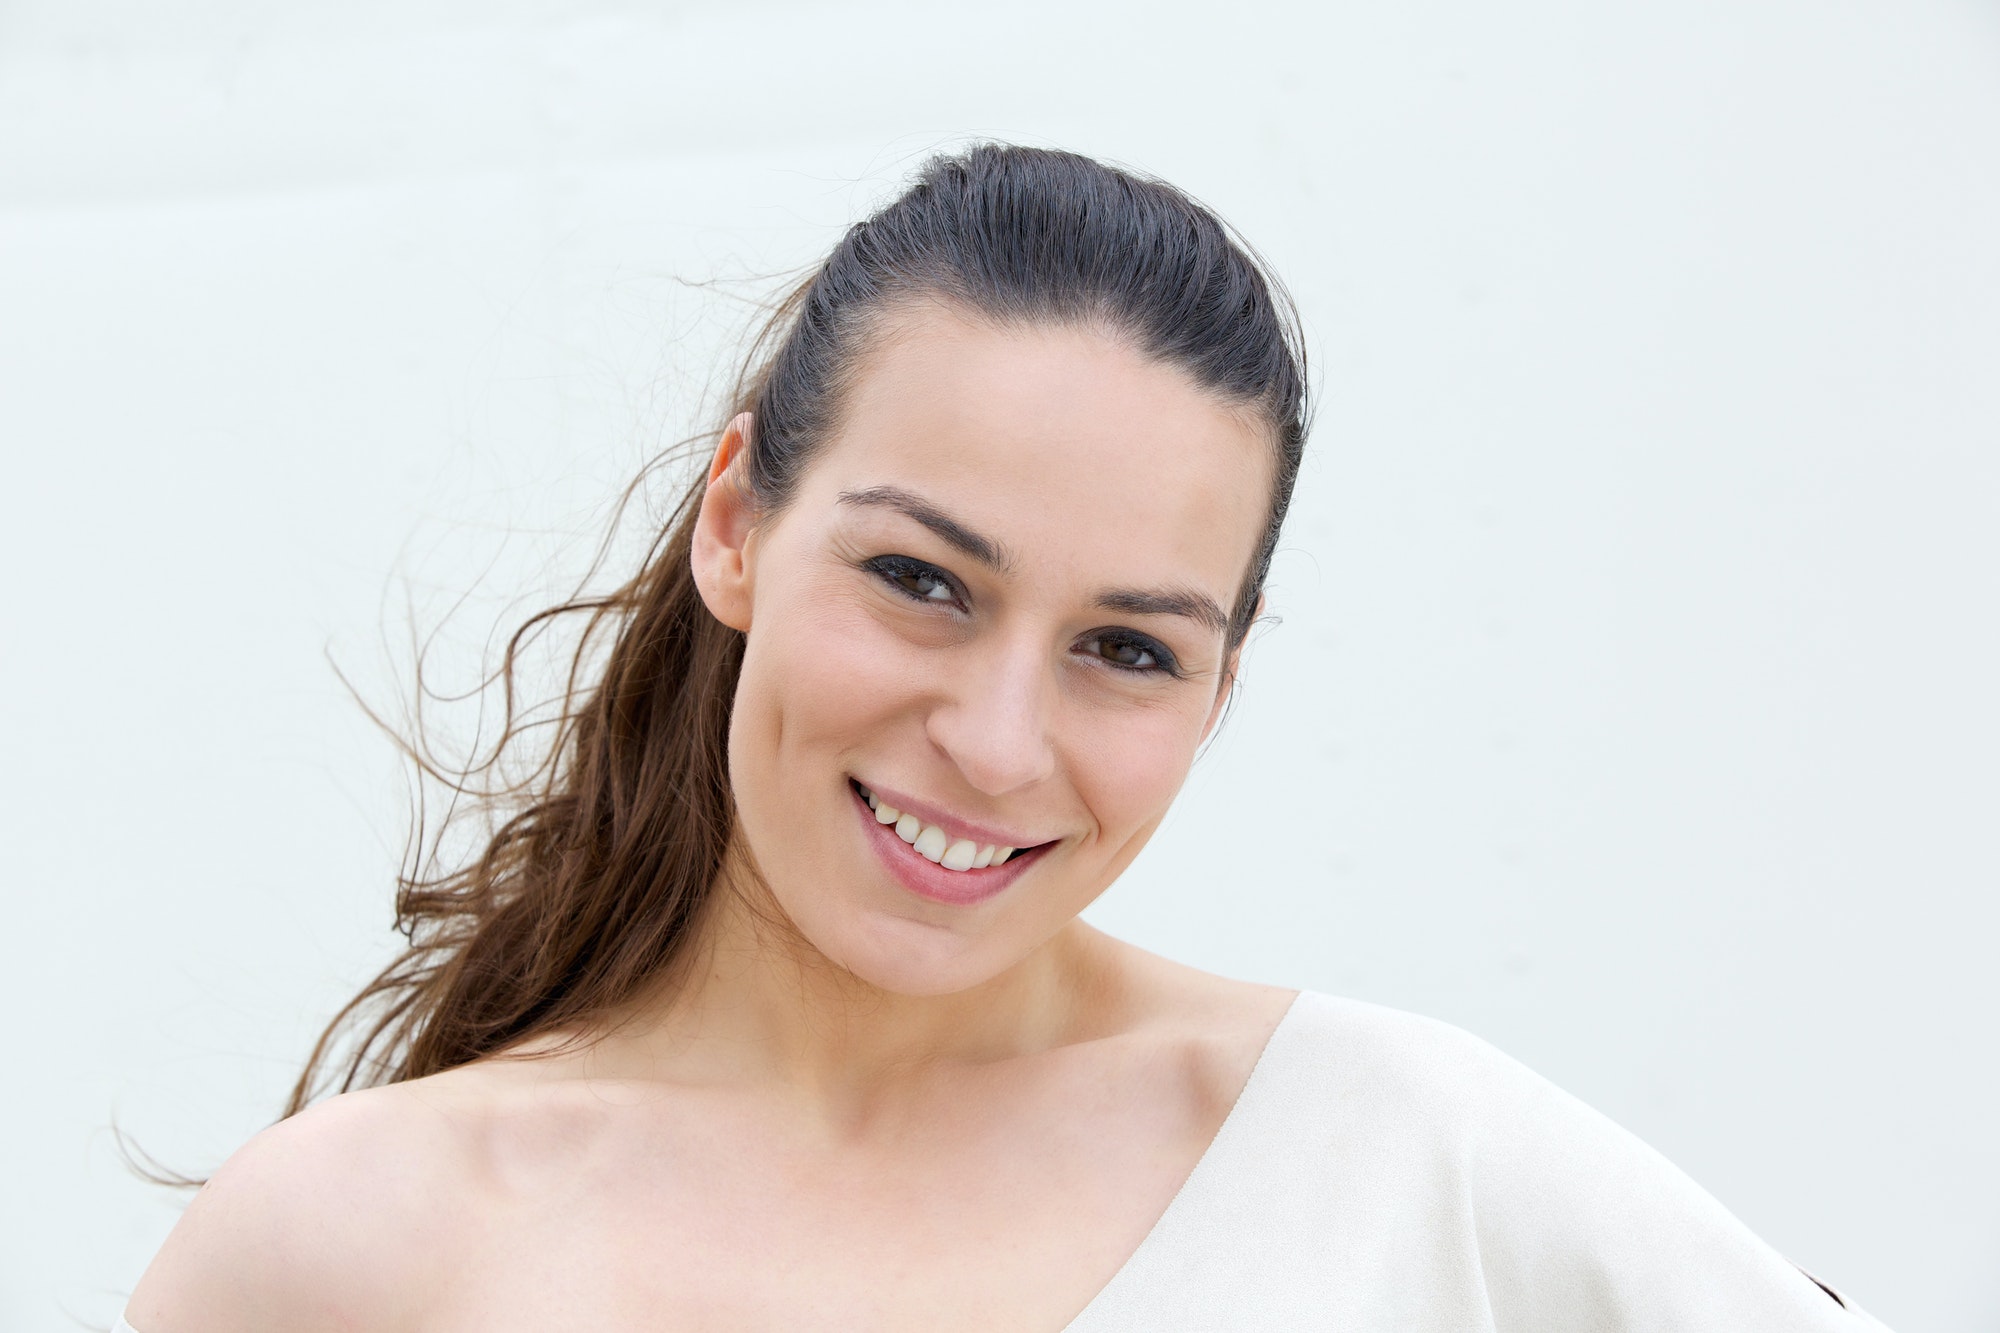 Young woman smiling on white background